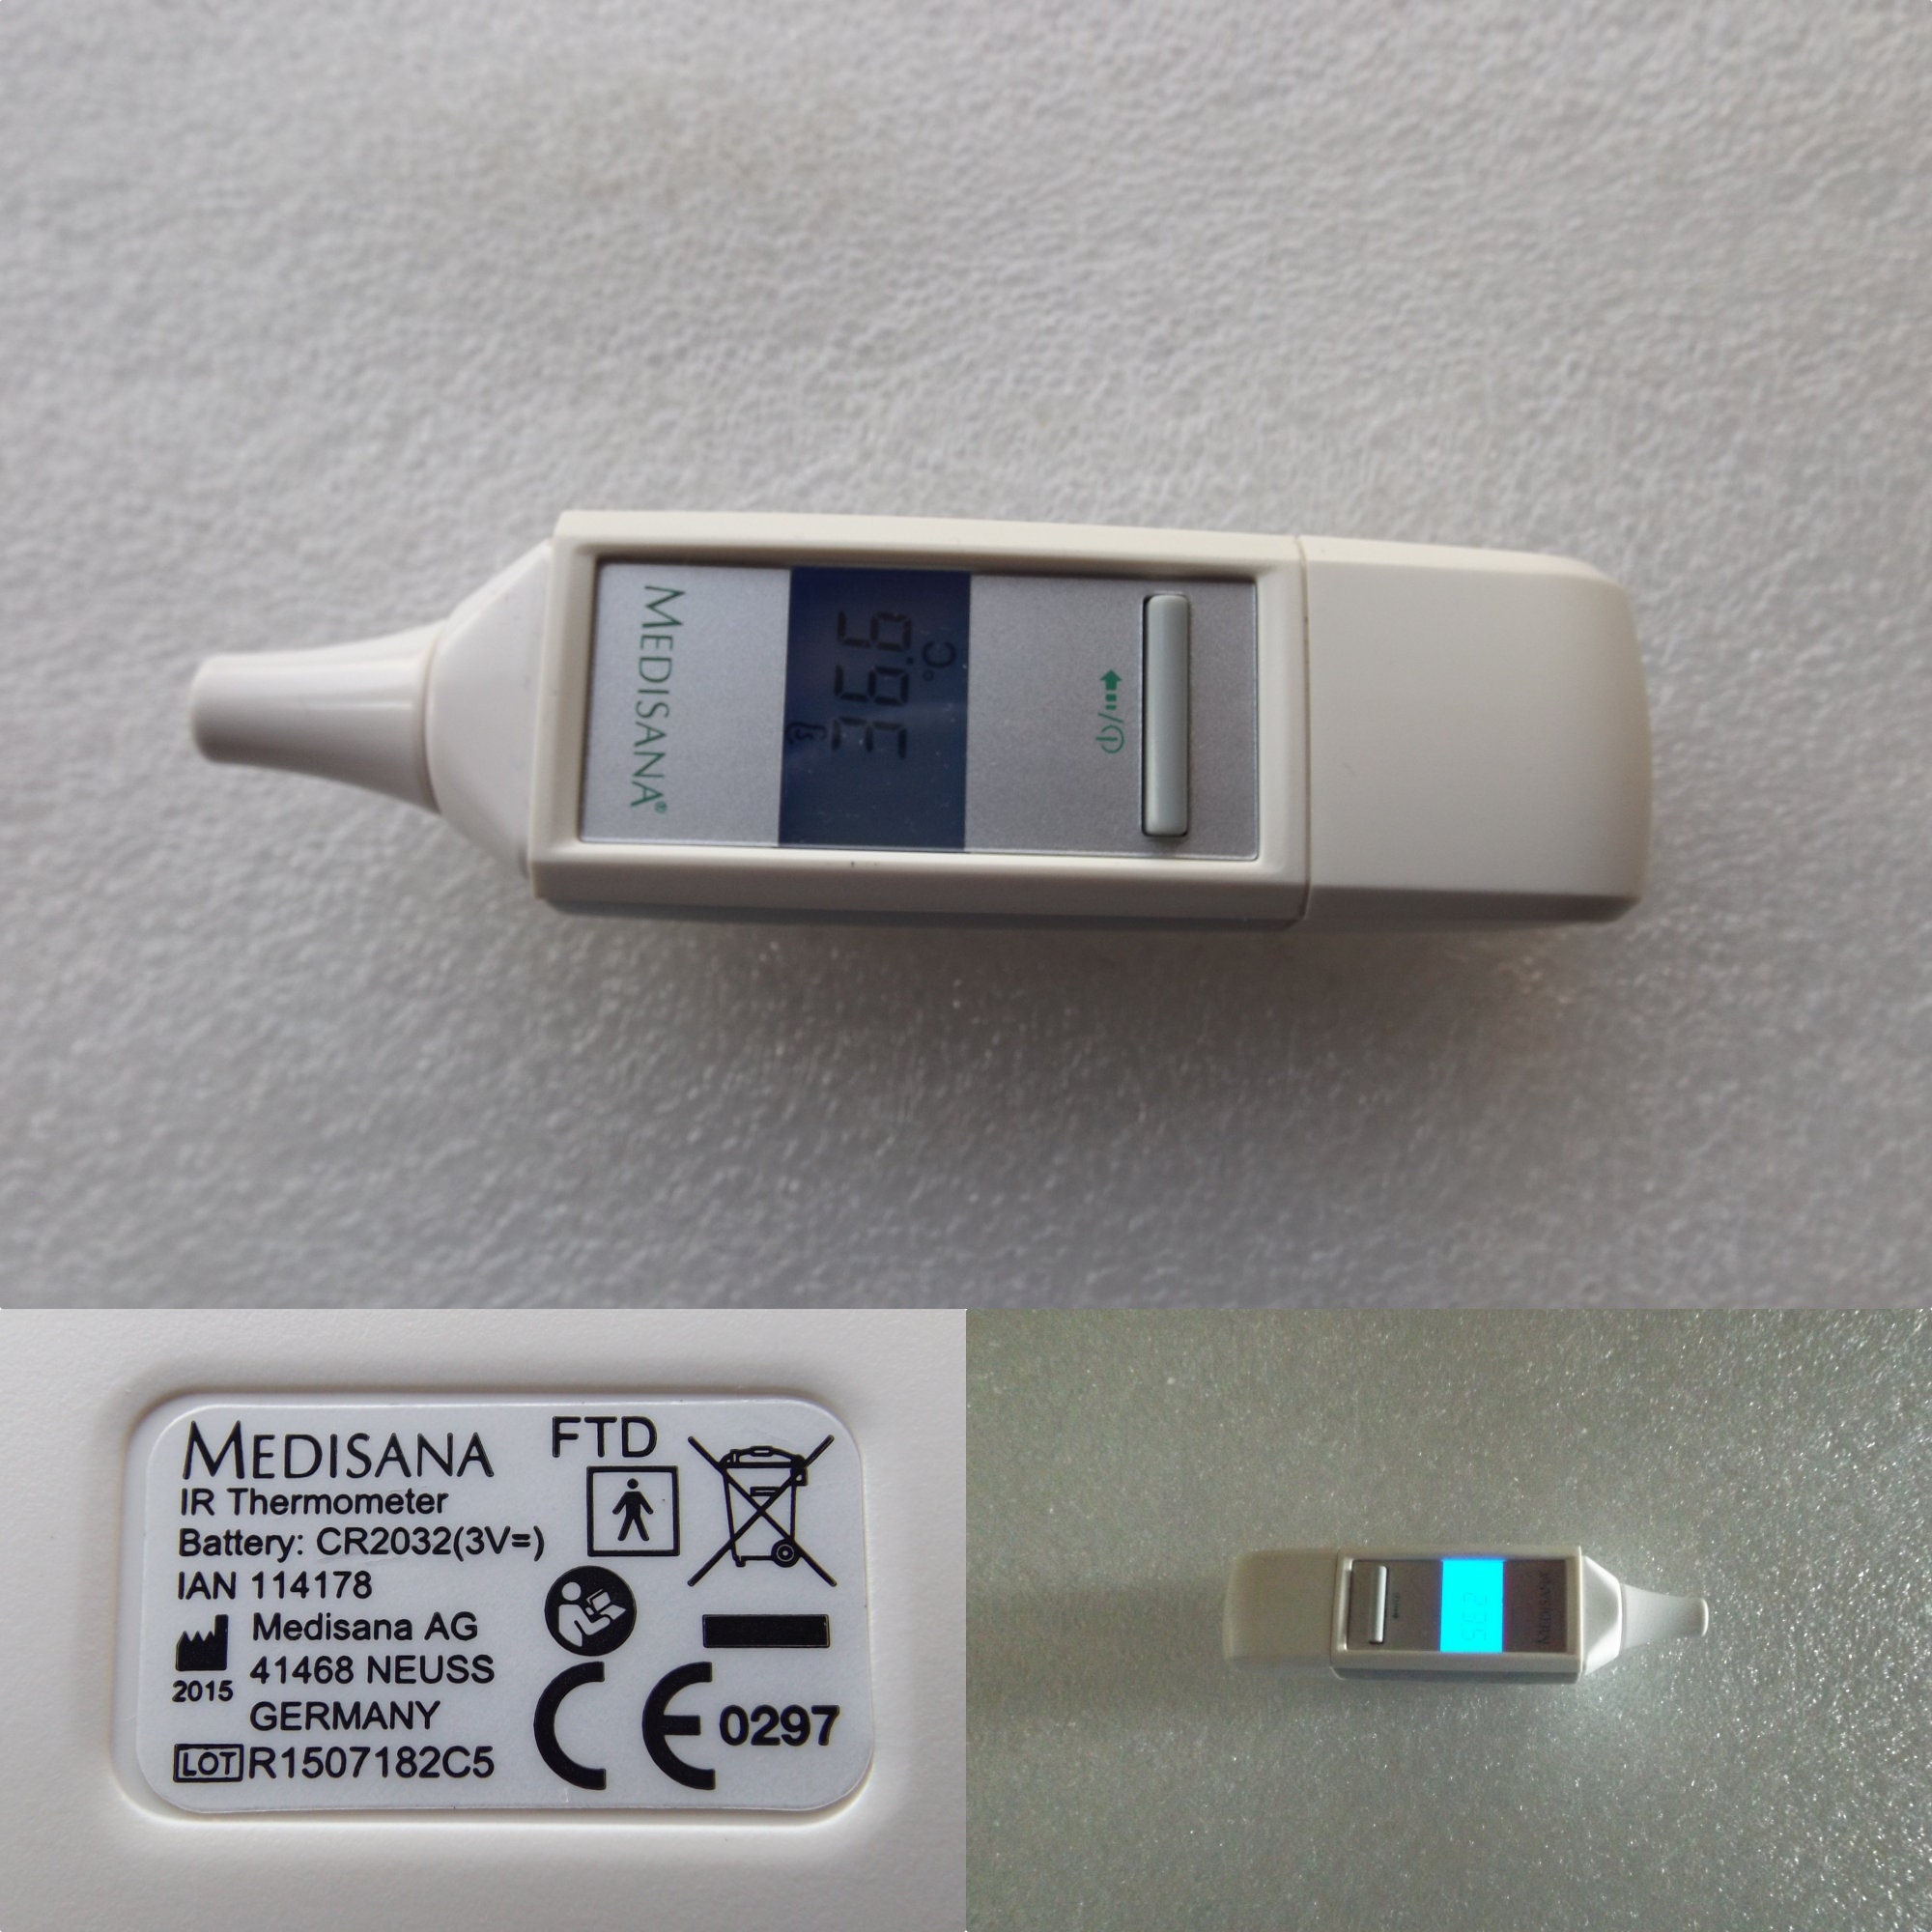 Infrared Thermometer Medisana FTD, Electronic Display, White, Germany, 3 in  1 Ear, Forehead, Room Temperature, FREE SHIPPING - Etsy